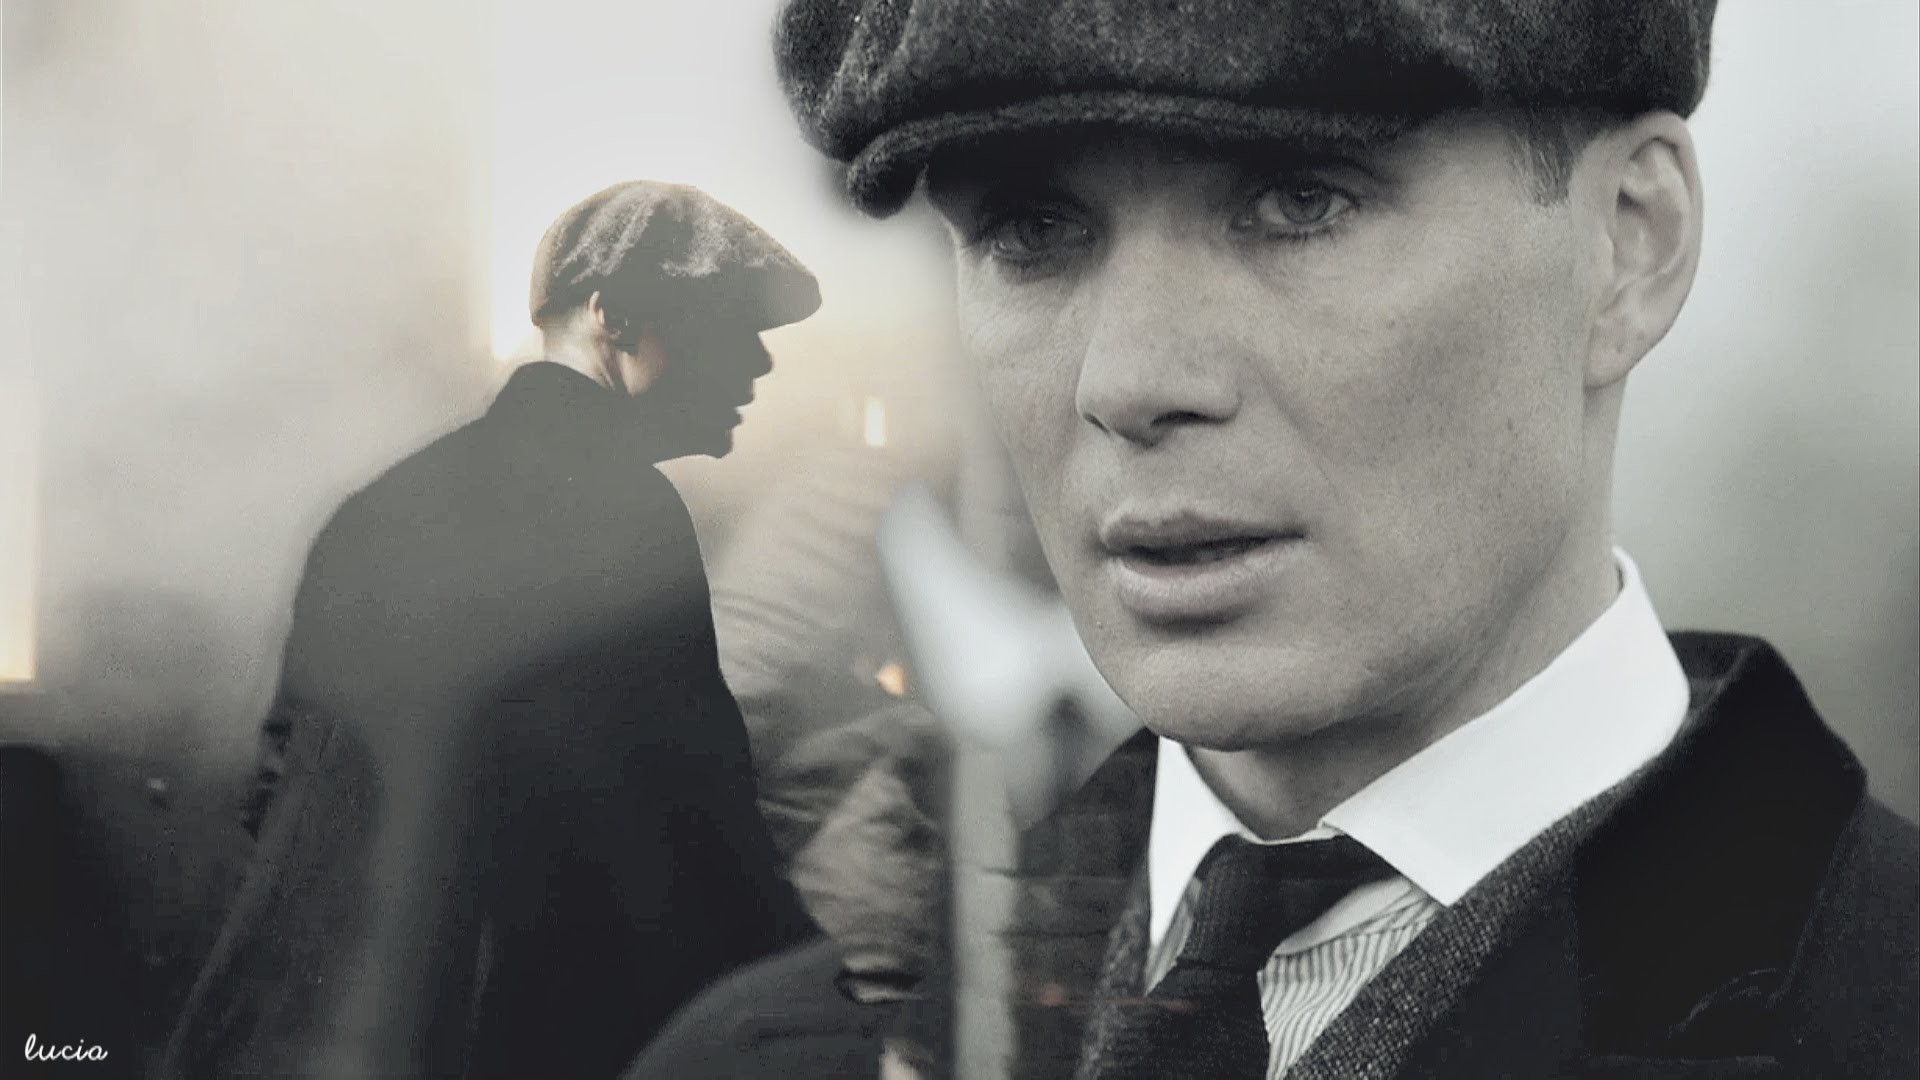 Wallpaper Peaky Blinders Art Thomas Tommy Shelby Art Peaky Blinders  Poster Painting Background  Download Free Image